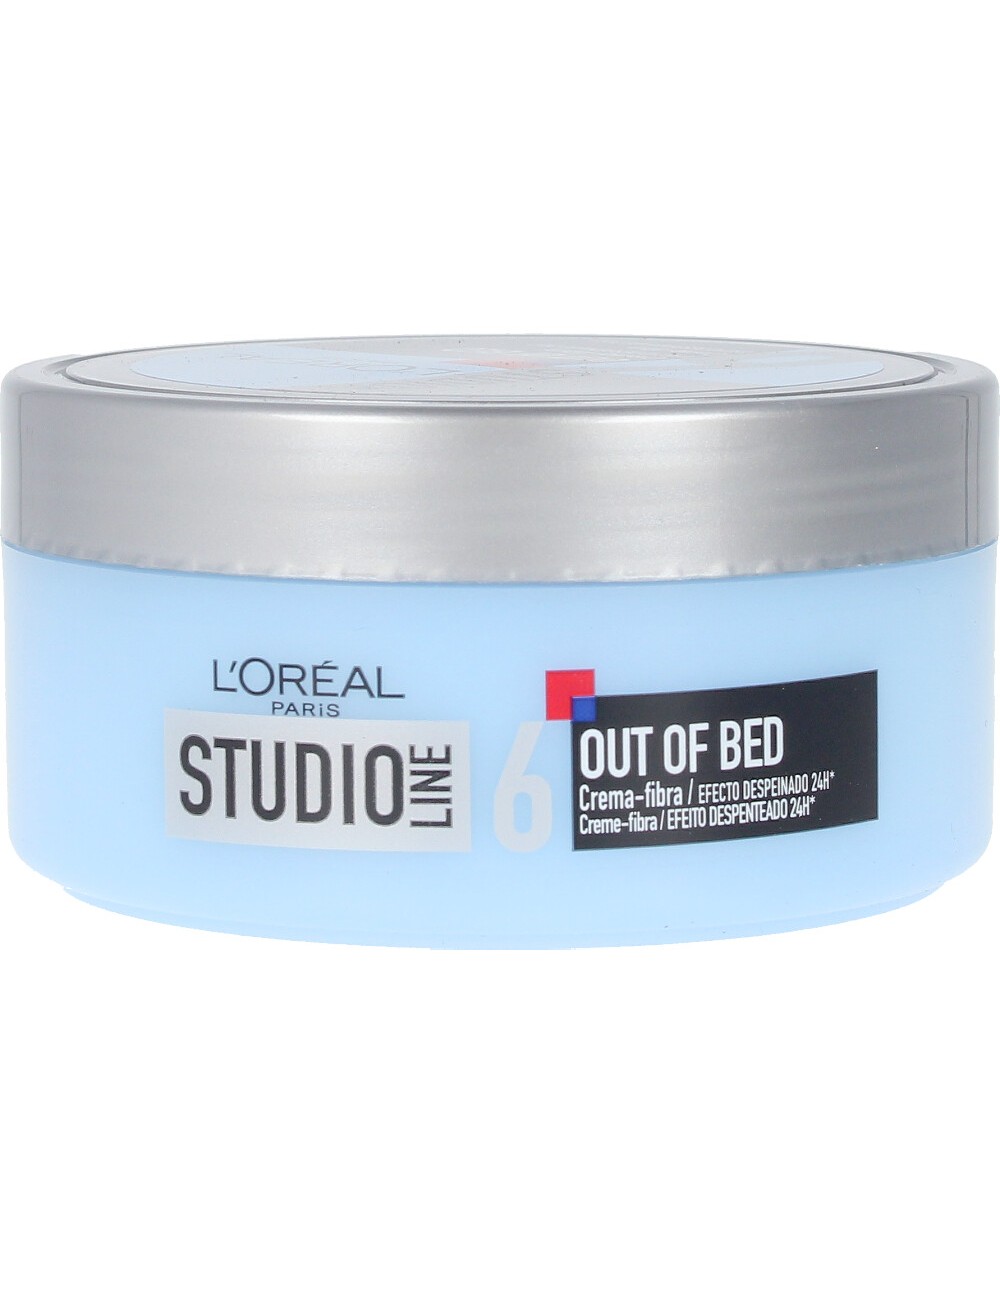 STUDIO LINE OUT OF BED modelling cream nº5 150 ml